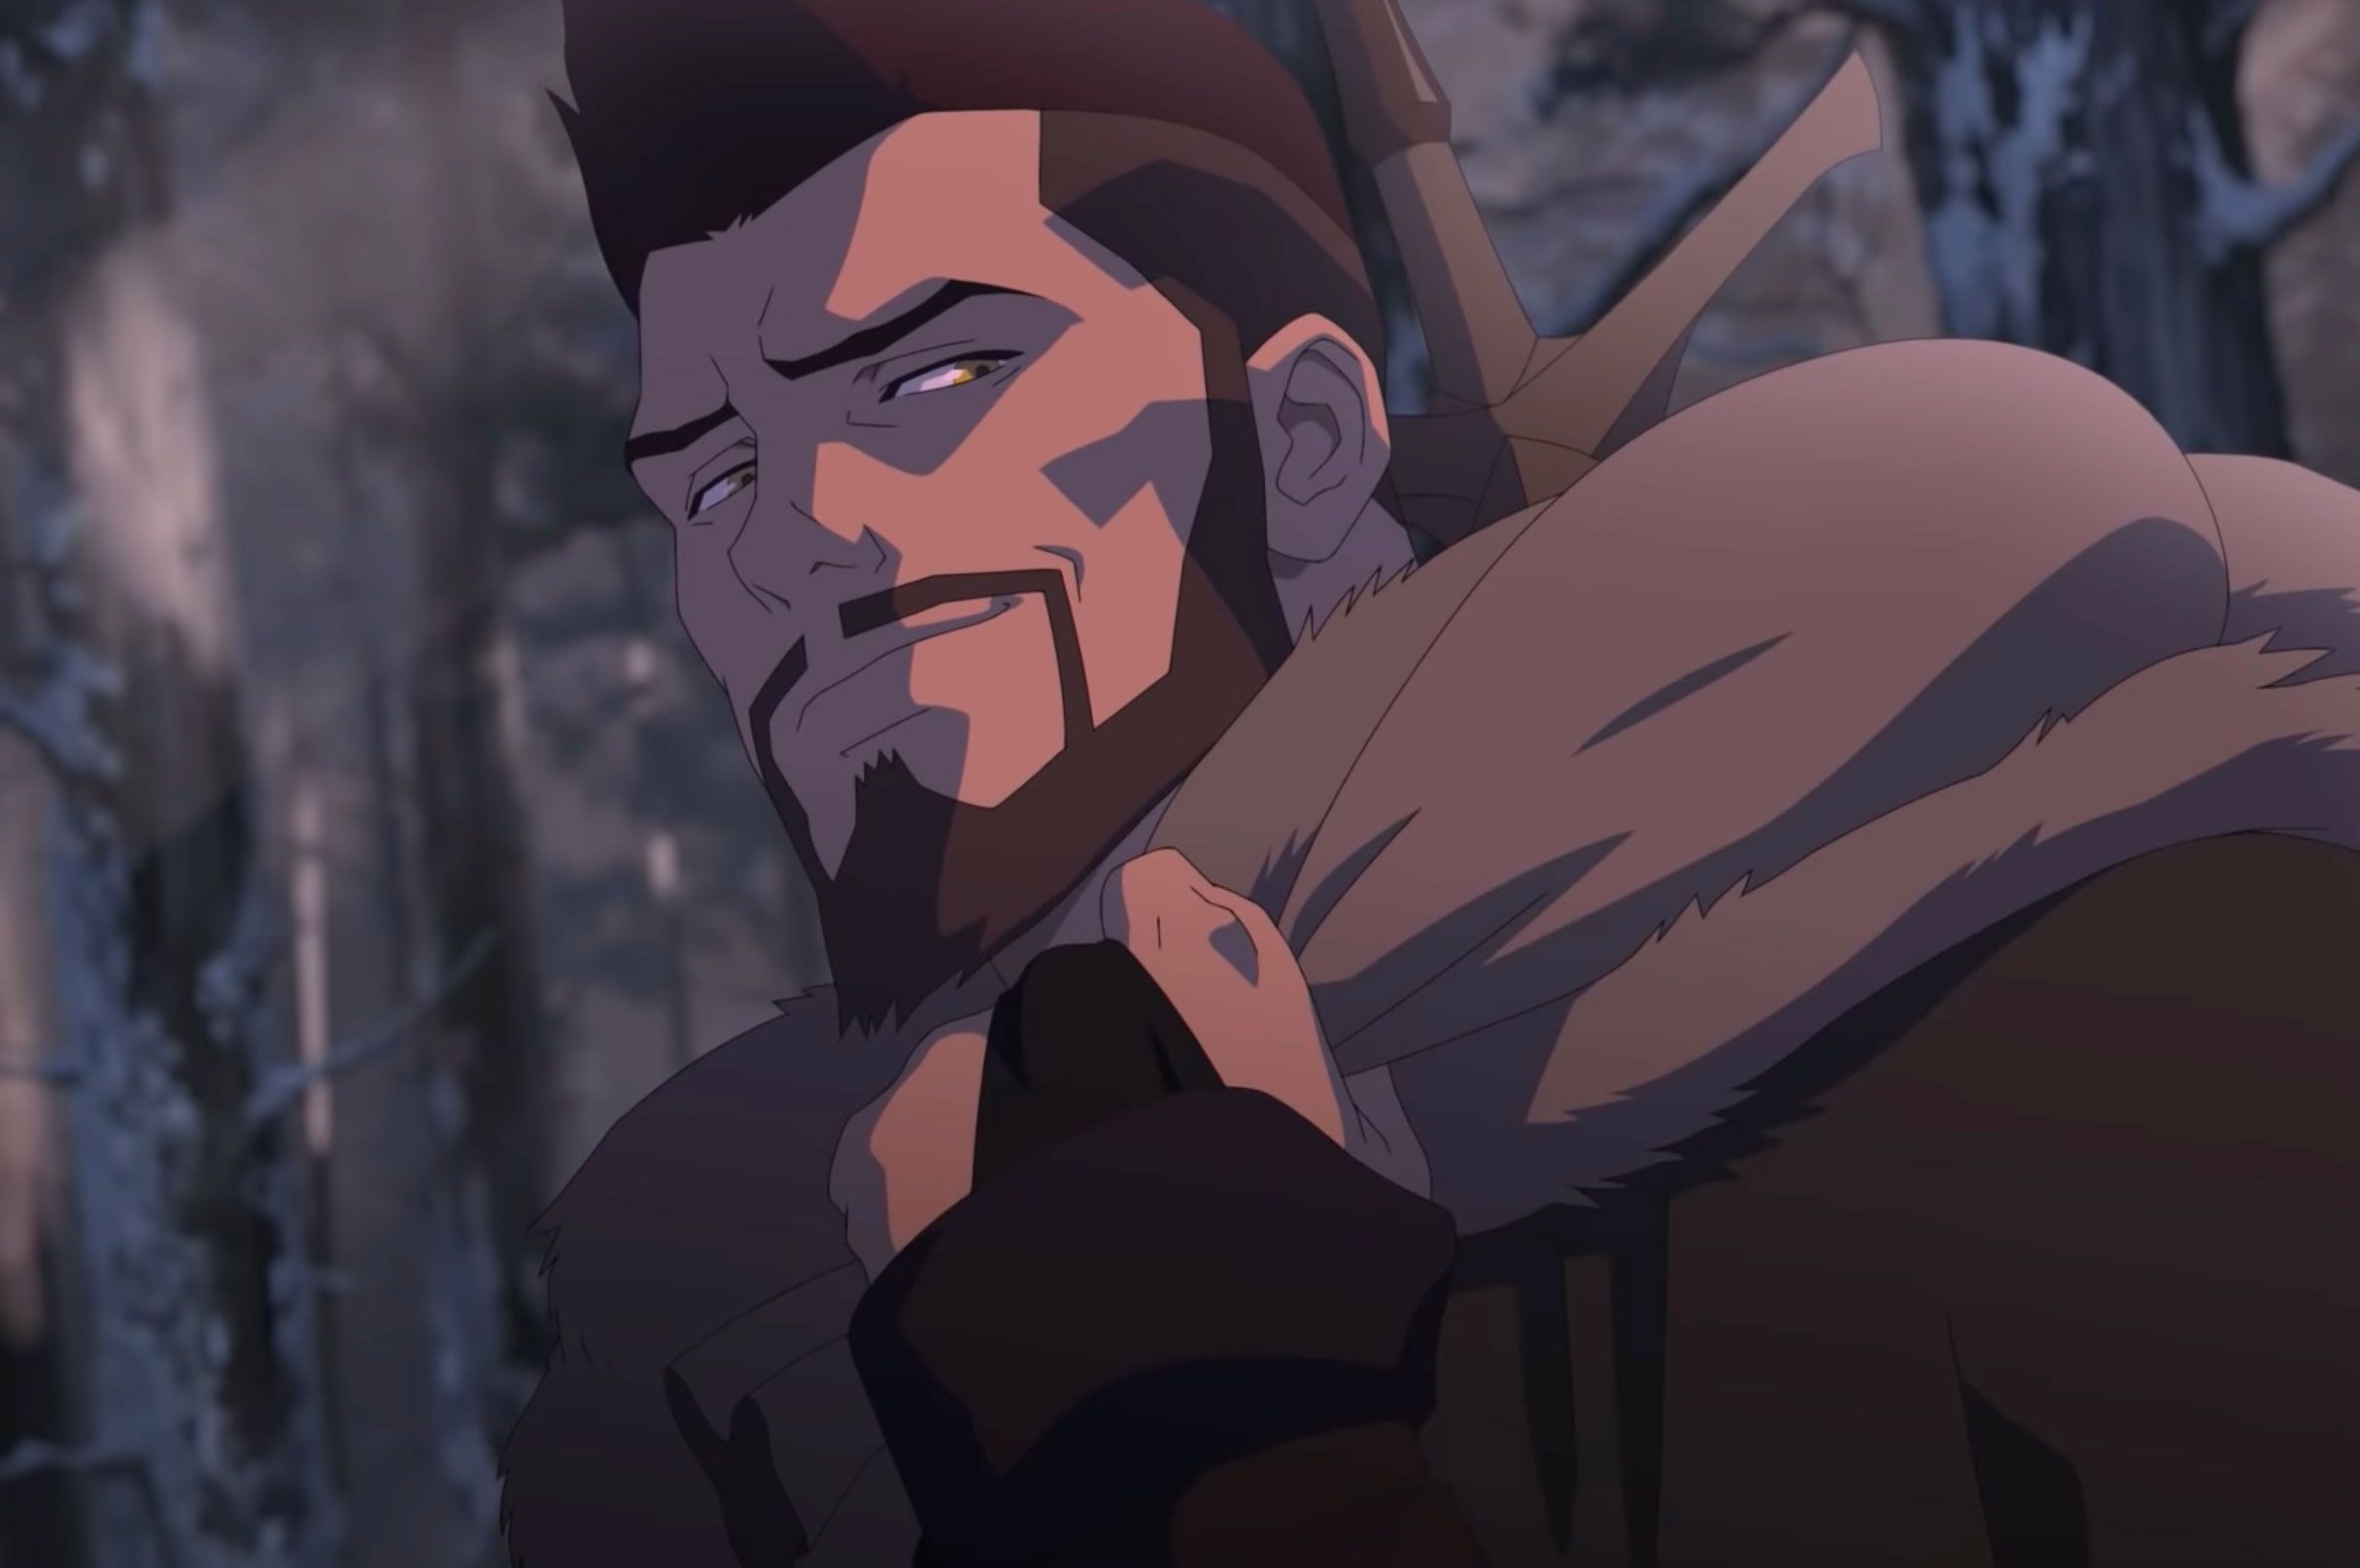 WATCH] 'The Witcher: Nightmare of the Wolf' Anime Trailer